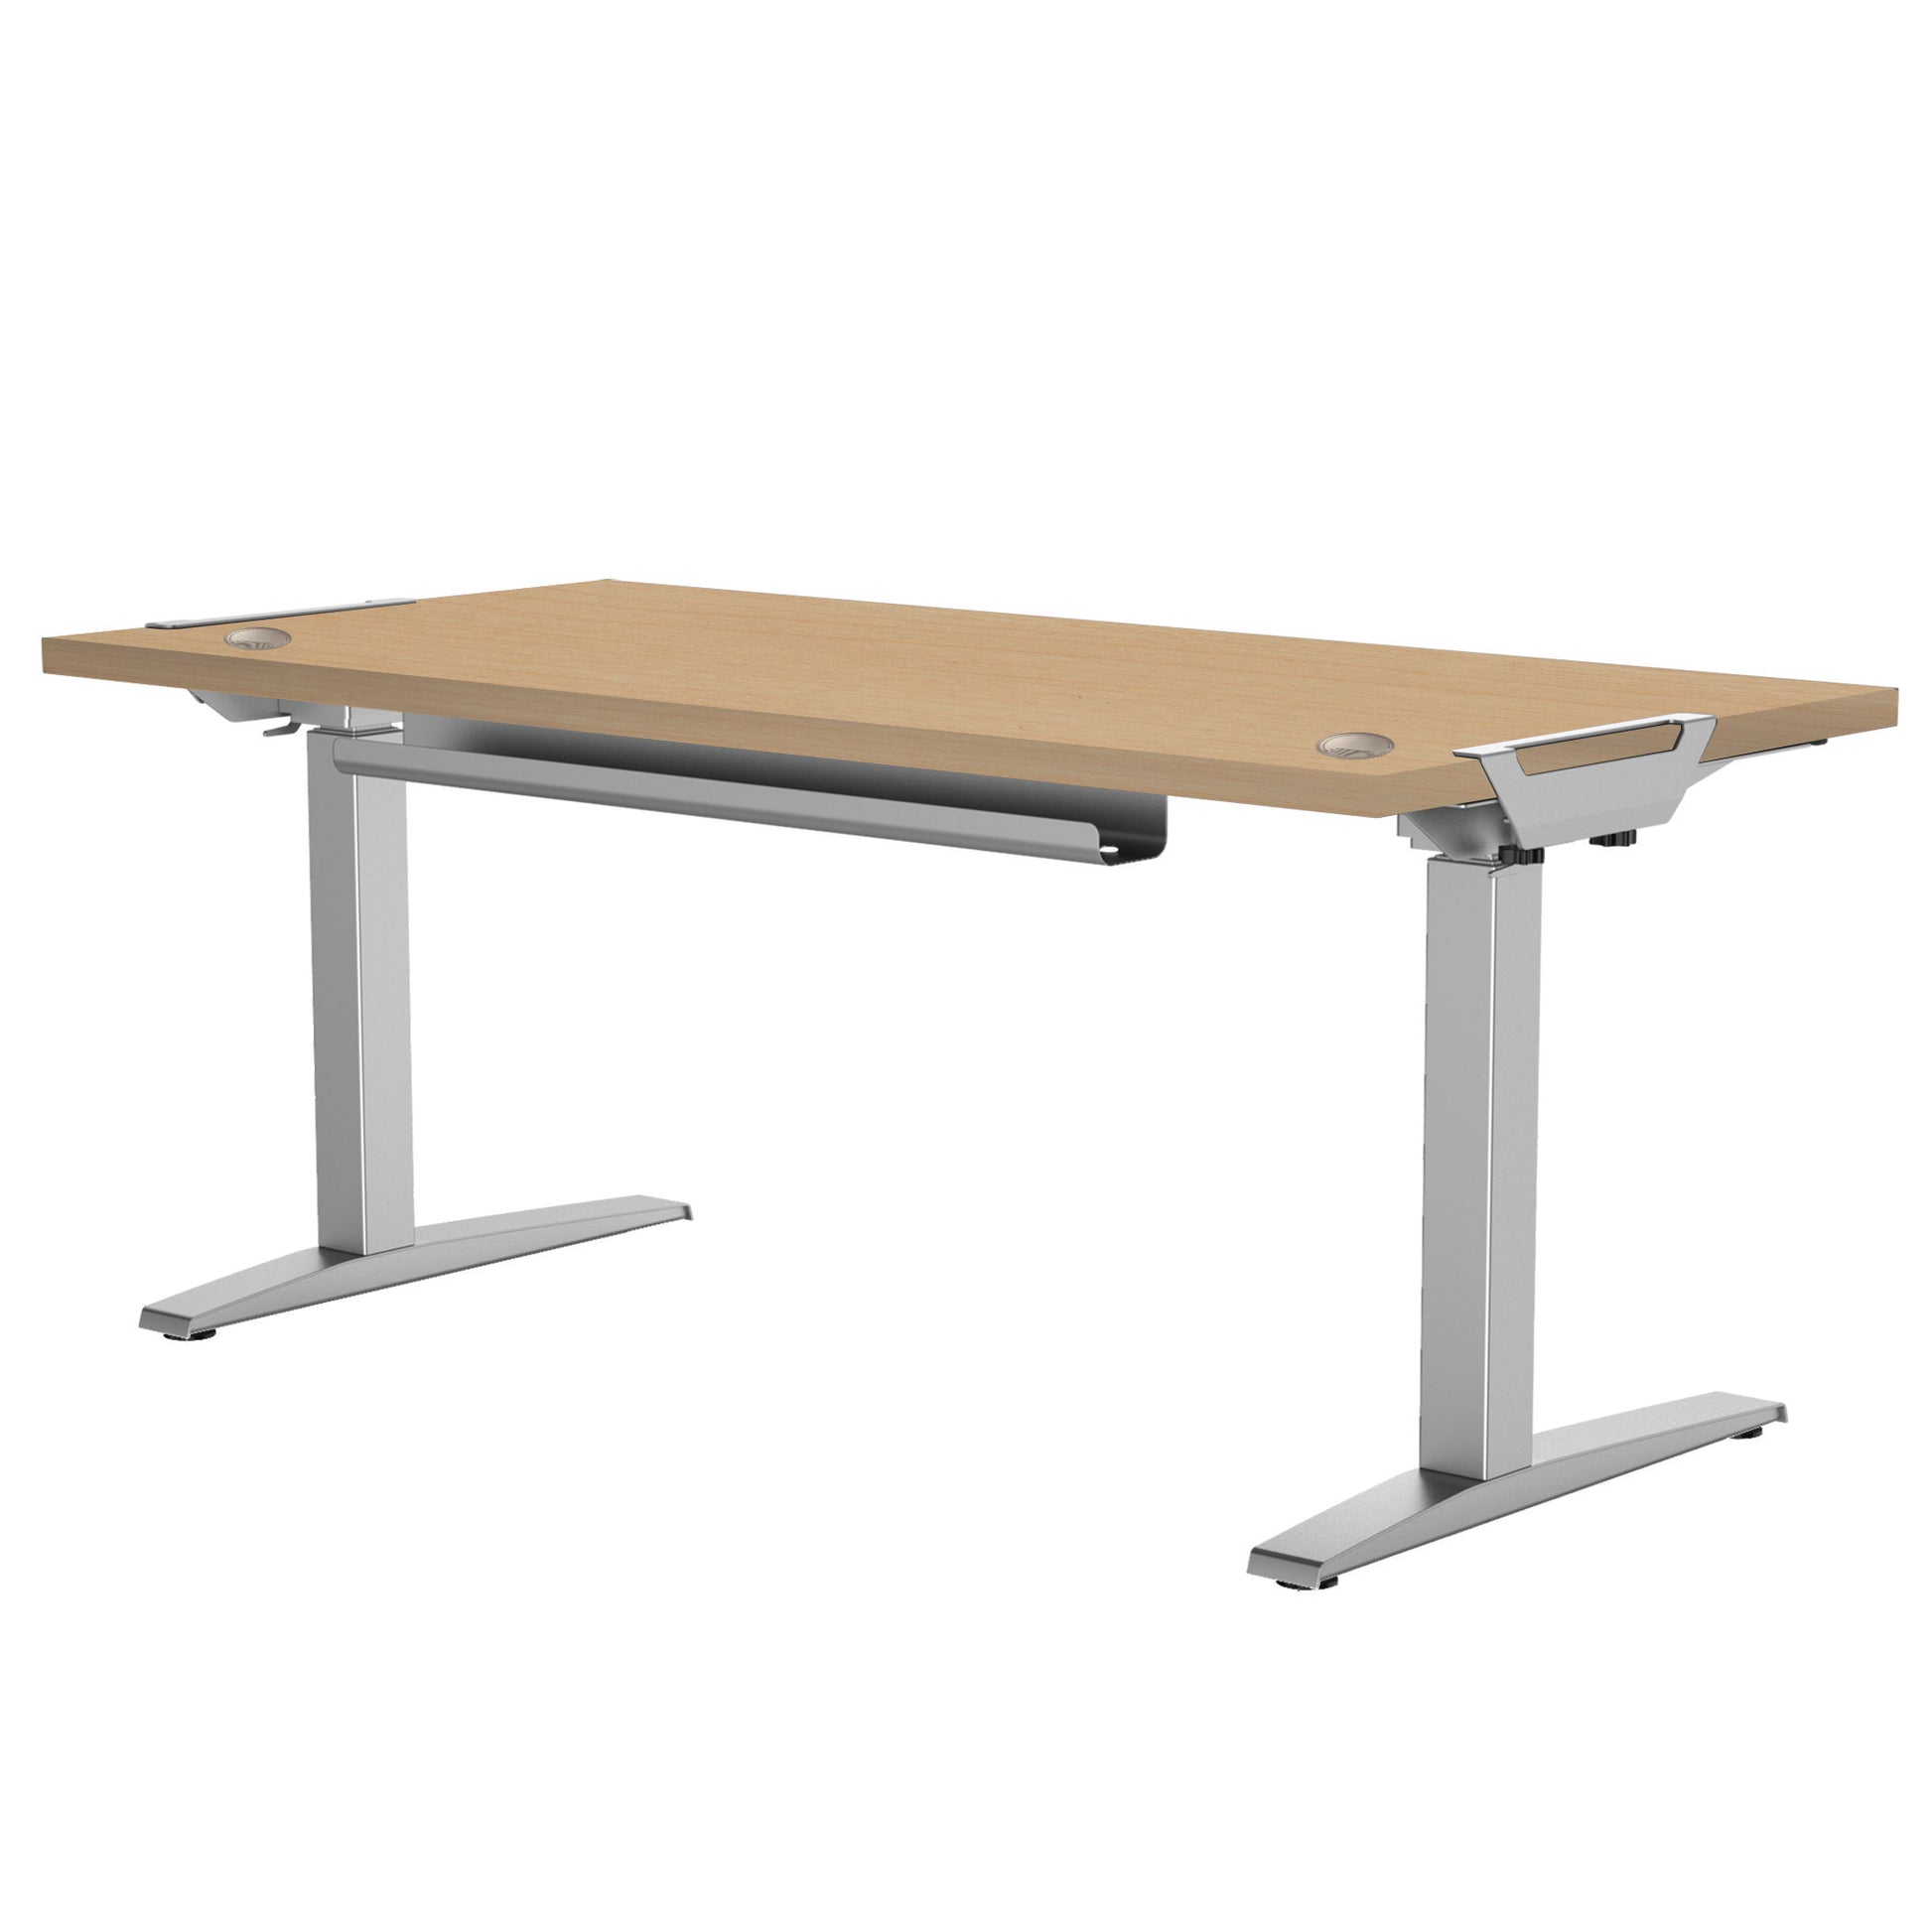 BUY FELOOWES Levado Height Adjustable Desk FREE SHIPPING 8949401. Standing desk/sit stand desk/stand up desk available with table top